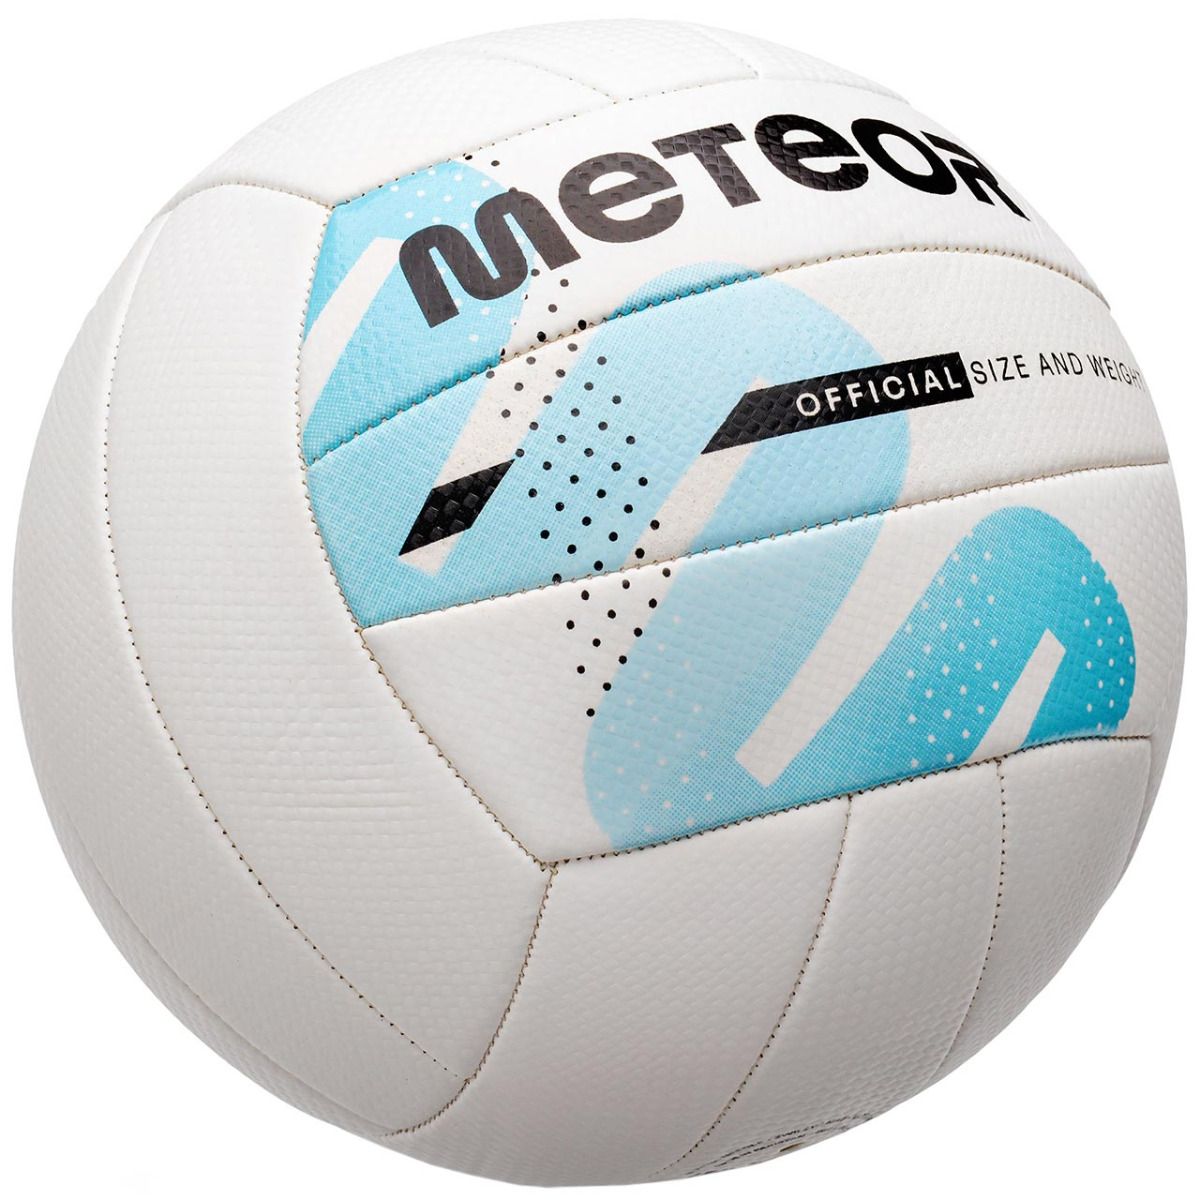 Meteor Volleyball 16453